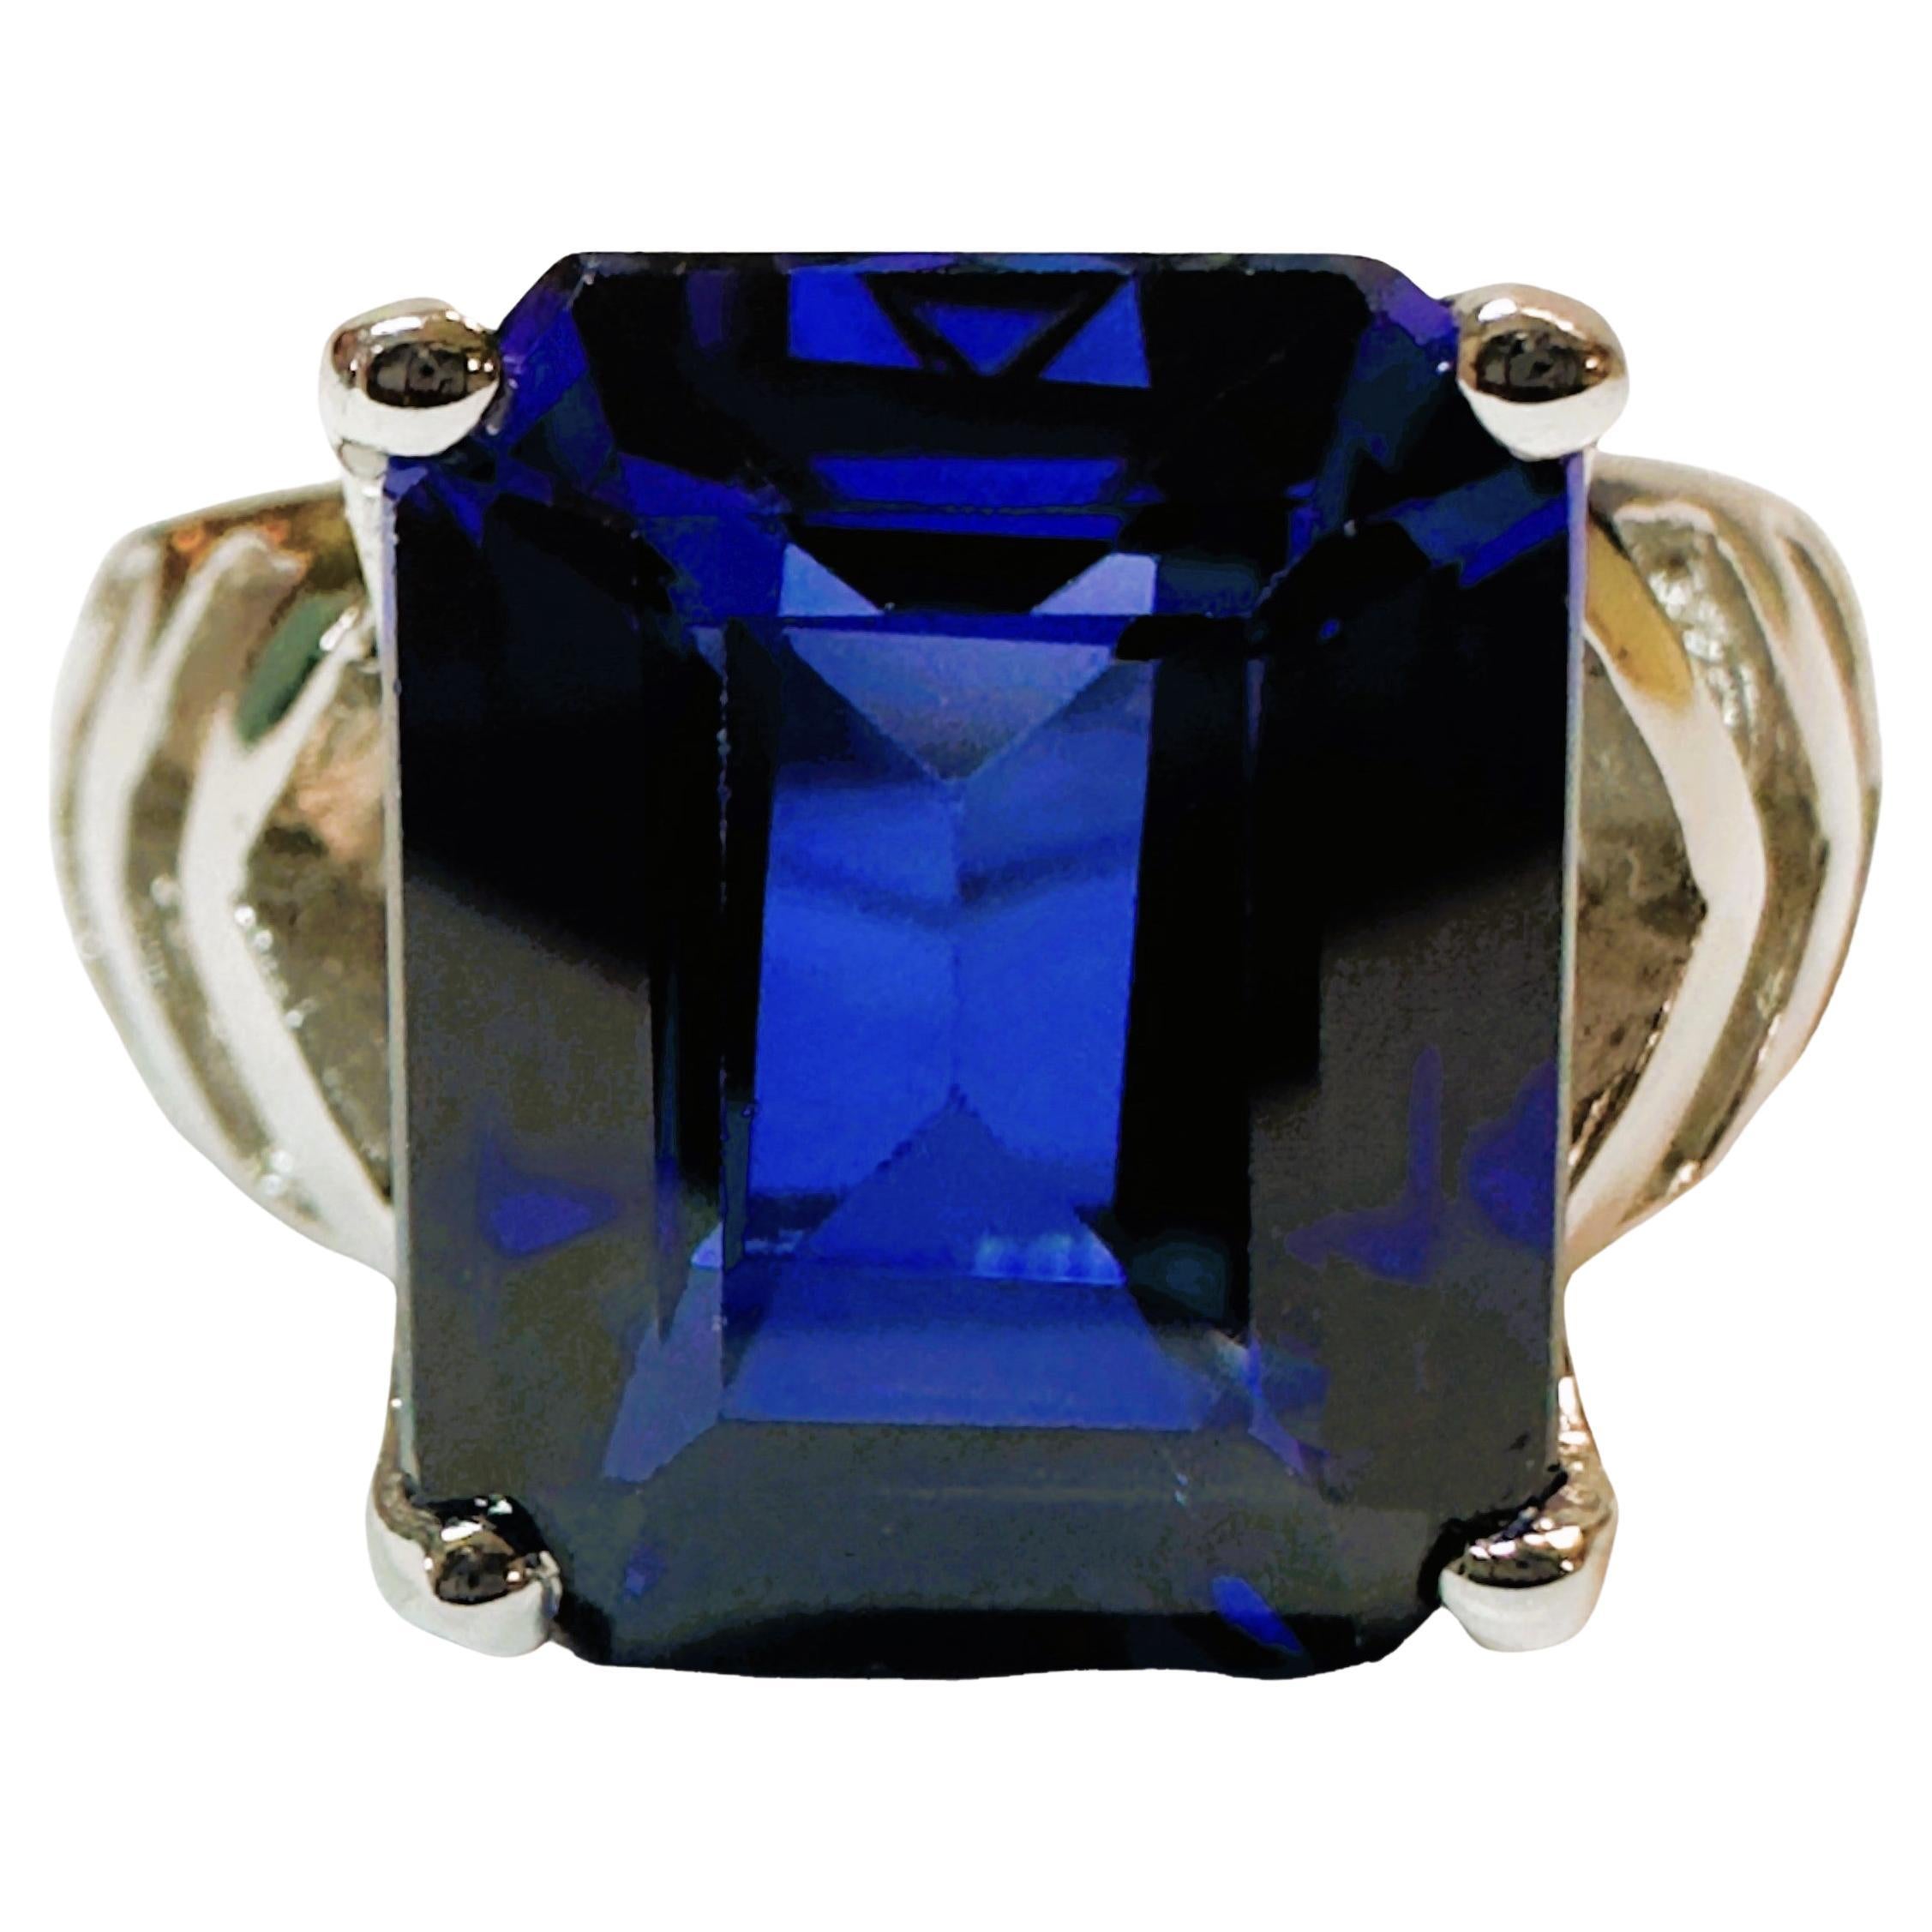 New Handmade African 8.30 Ct Royal Blue Sapphire Sterling Ring Size 7.25 For Sale